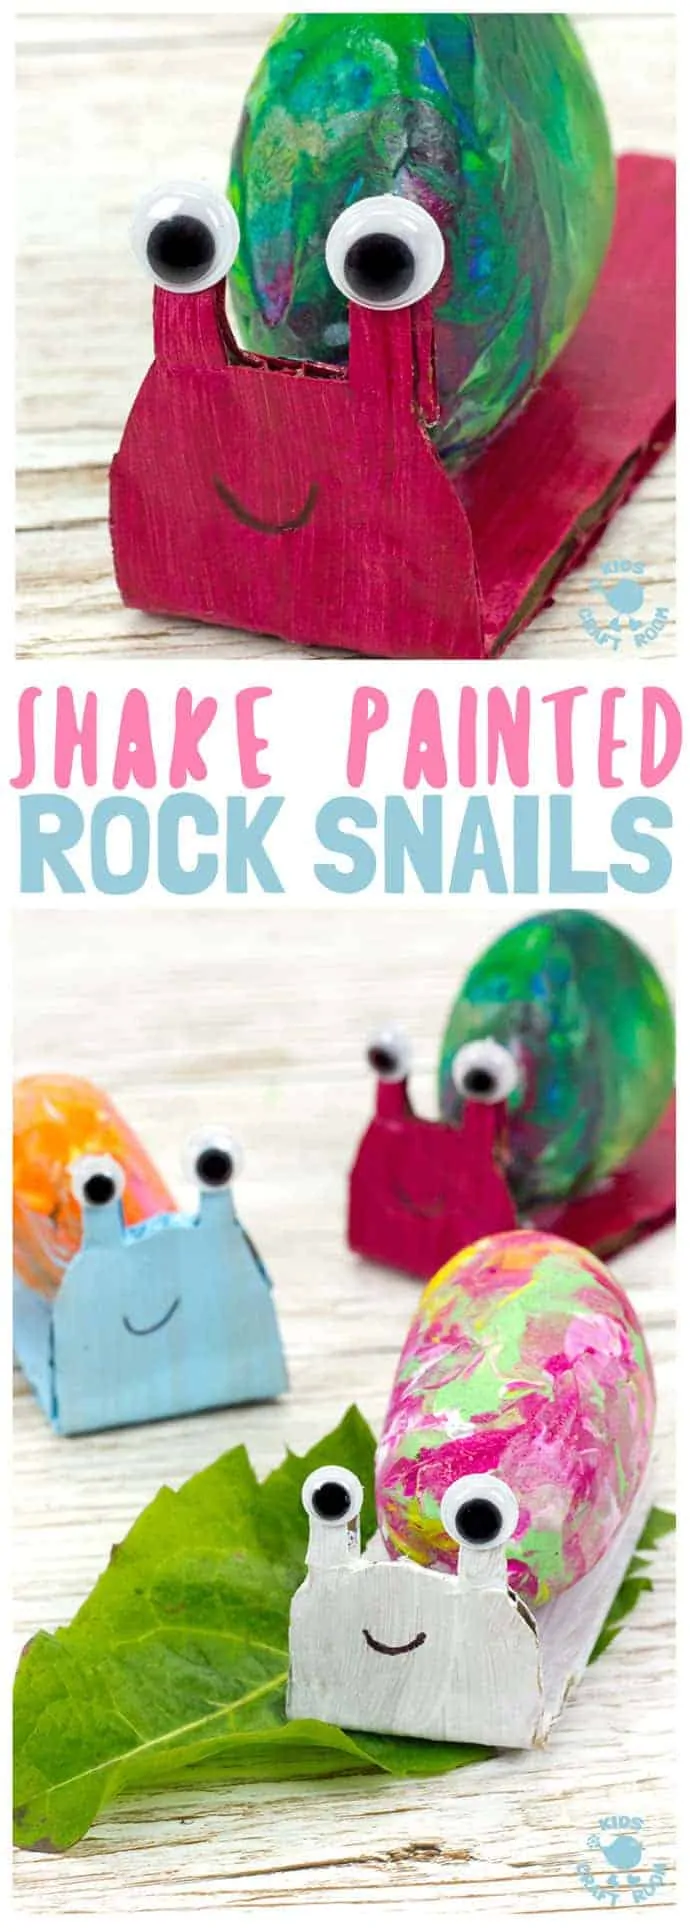 SHAKE PAINTING - CUTE SNAIL ROCK CRAFT- This rock painting idea gets kids active and is virtually mess free! This Snail Craft gets kids shaking out their wiggles and fidgets to make beautifully painted rock snail shells! Grab your rocks, your kids and your wiggles and let's make cute snails. It is so fun and each is unique! #rockcrafts #paintedrocks #rockpainting #naturecrafts #kidscrafts #craftsforkids #kidscraftroom #snails #snailcrafts #summercrafts #springcrafts #shakepainting #painting